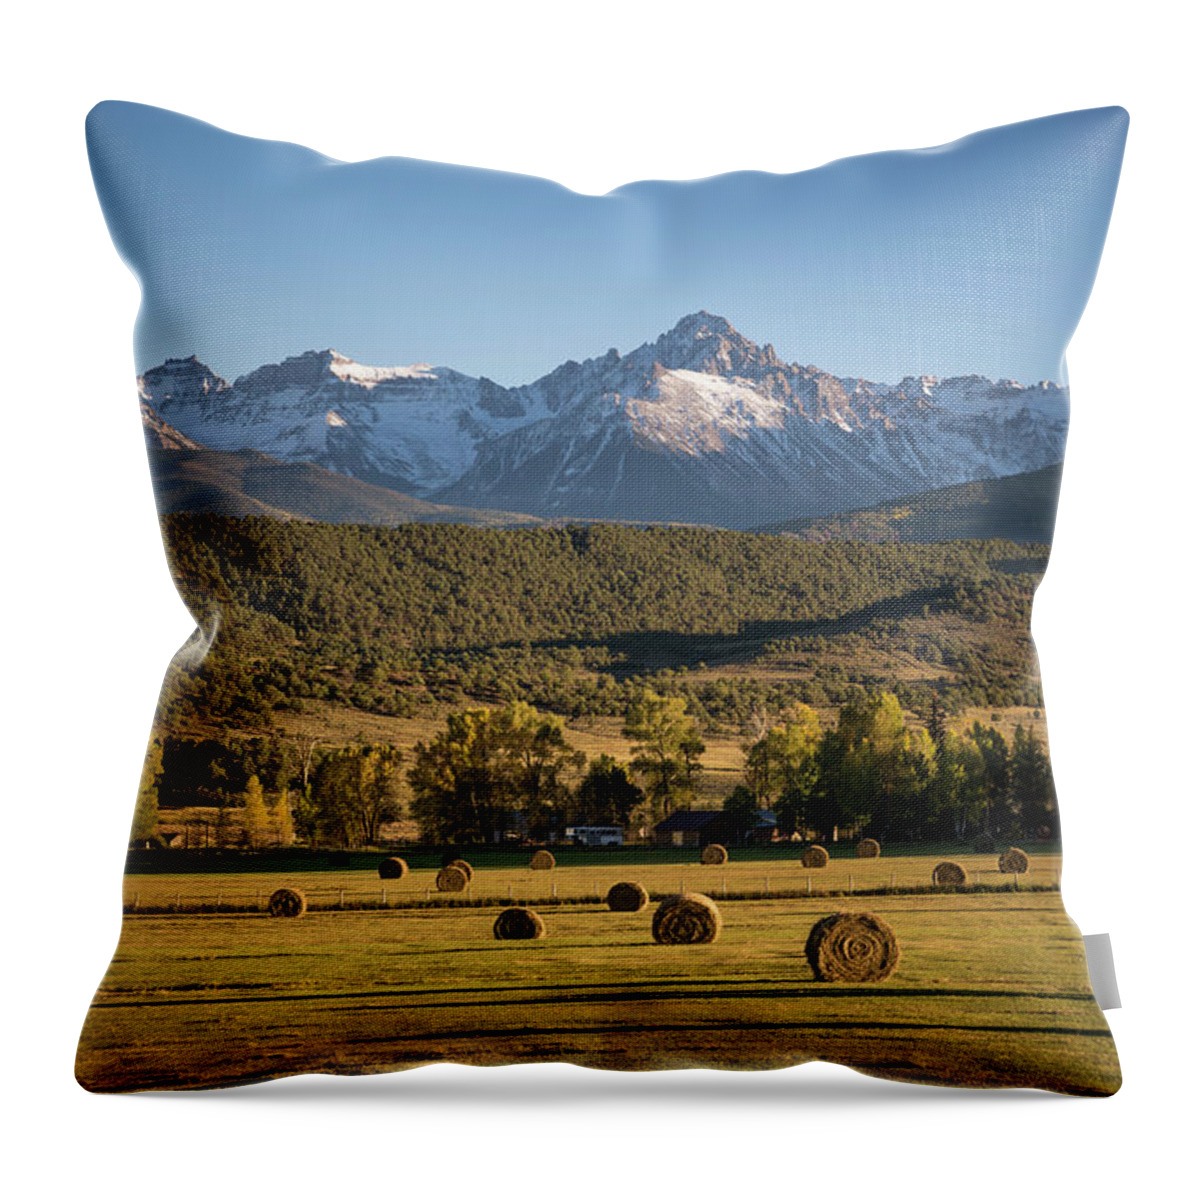 Colorado Throw Pillow featuring the photograph Farm Ranch Scene With Large Hay Bales by Whit Richardson